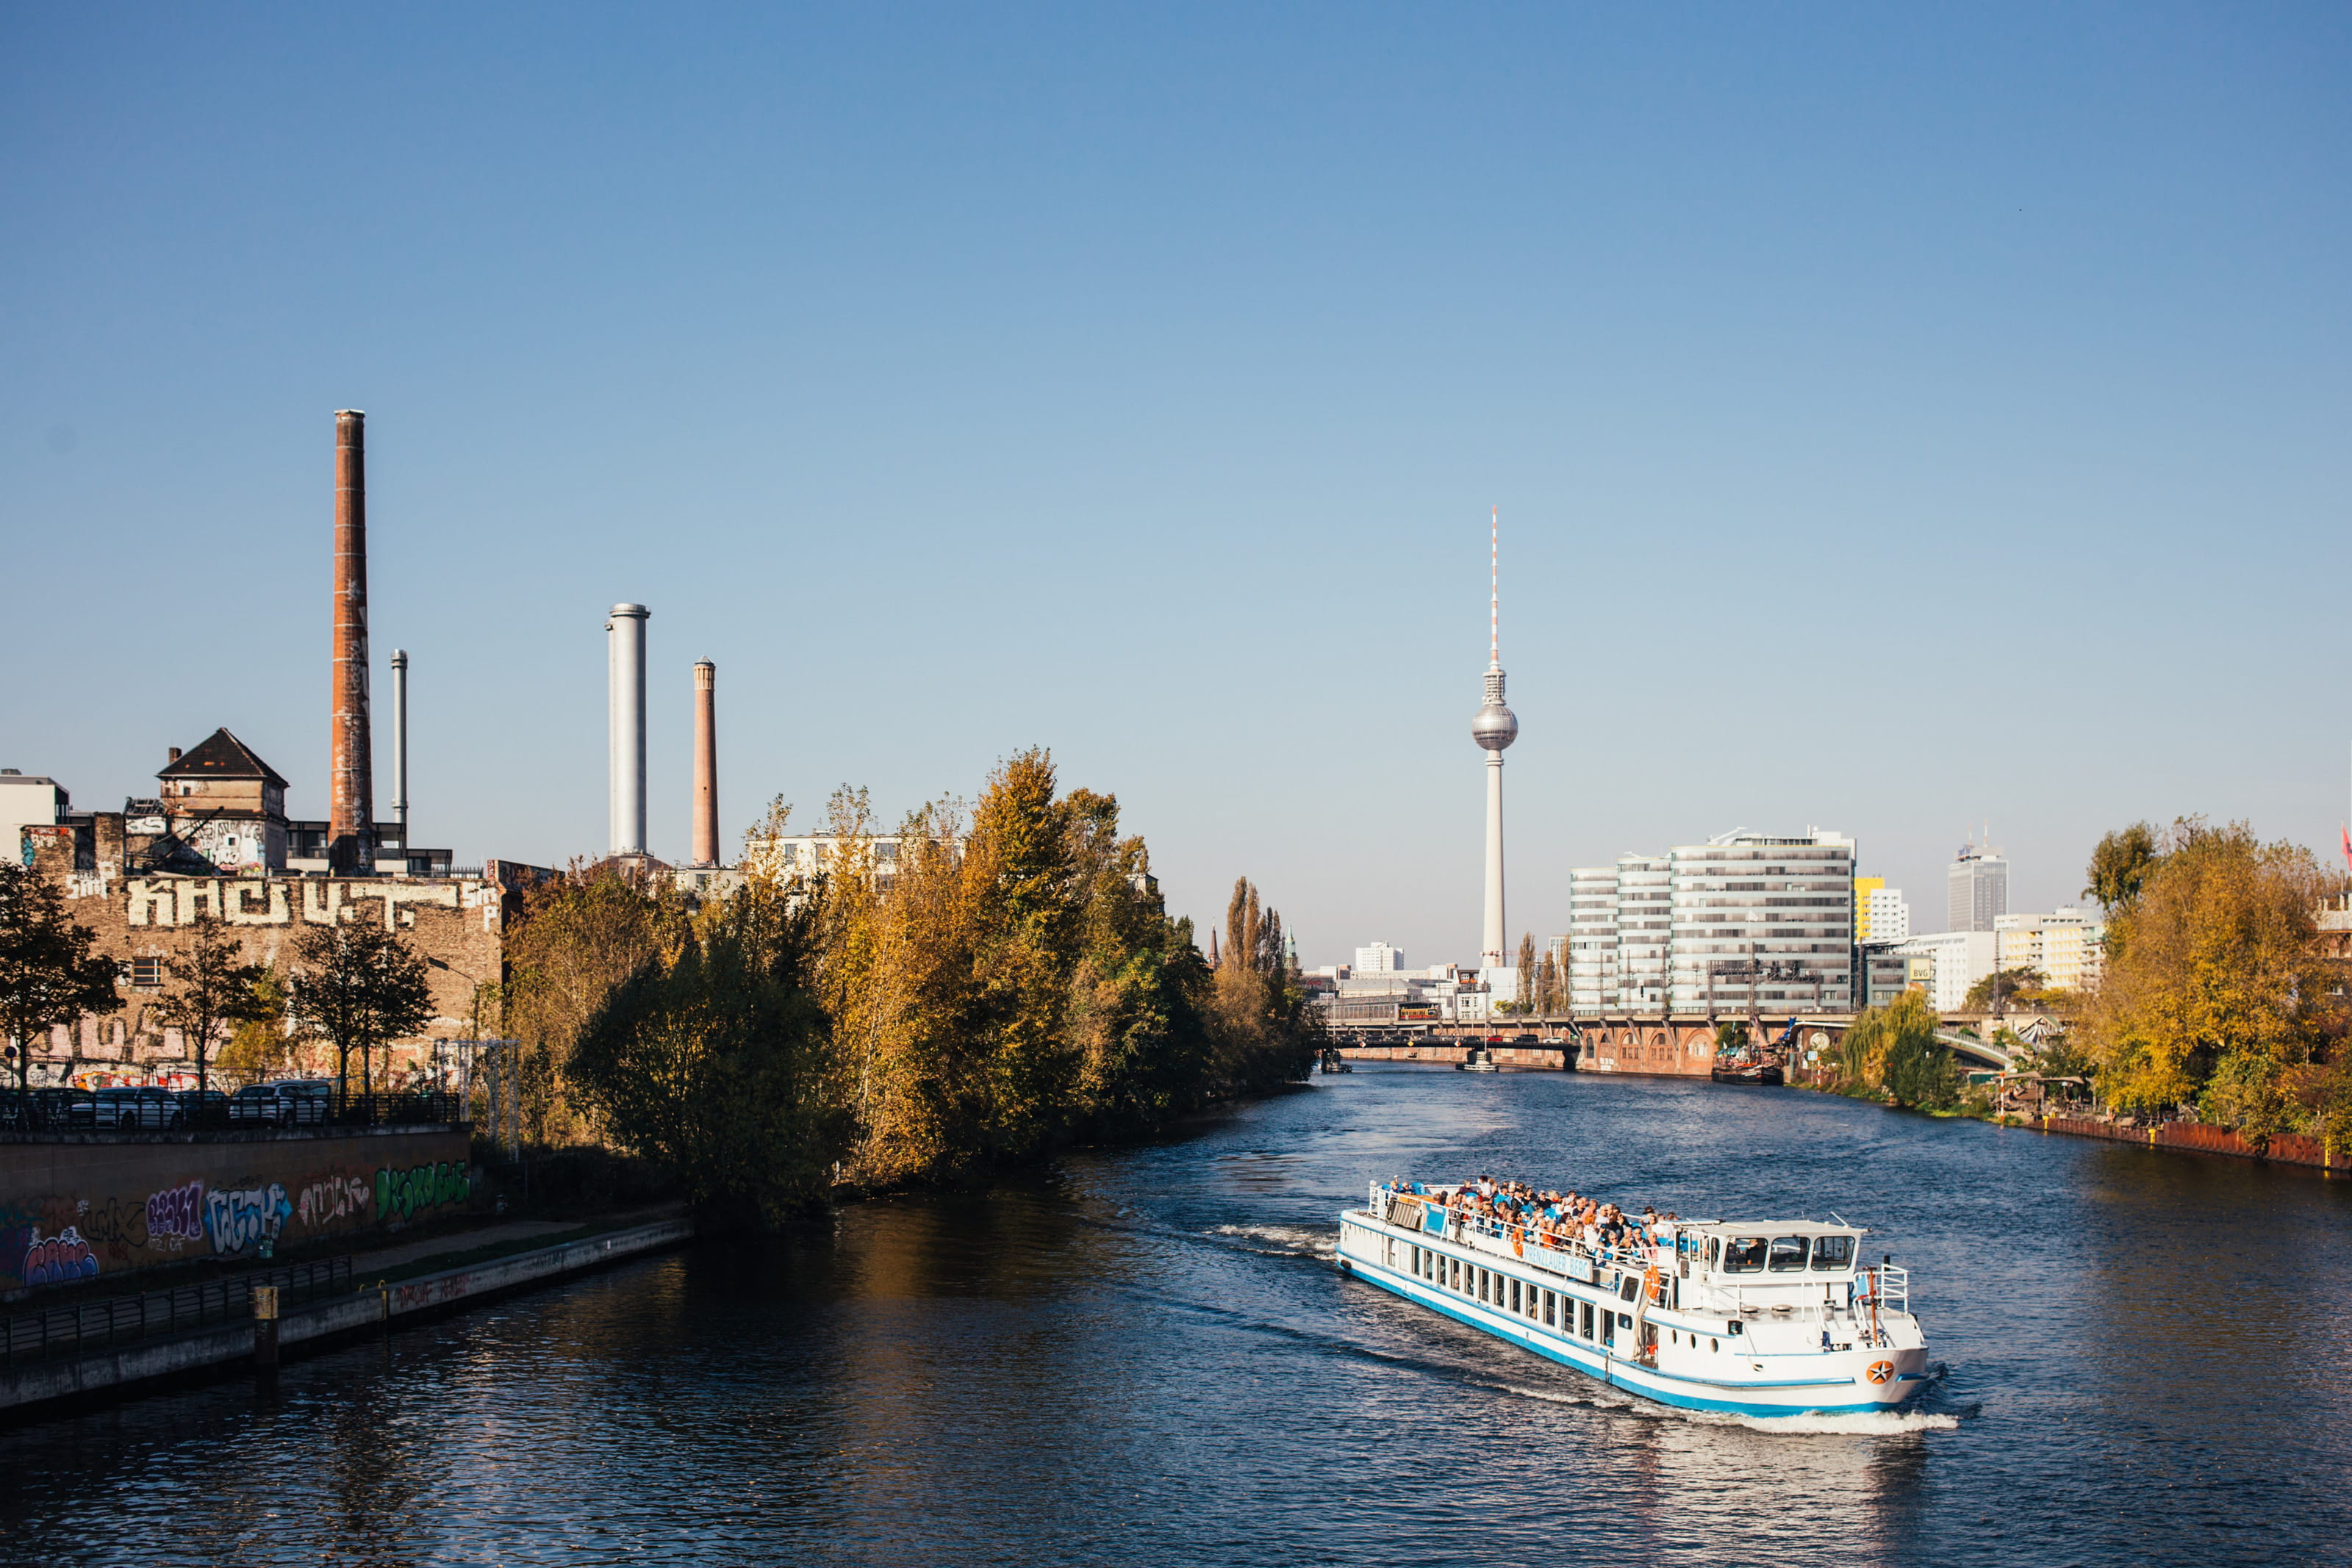 Boat in a river in Berlin with city buildings in the background